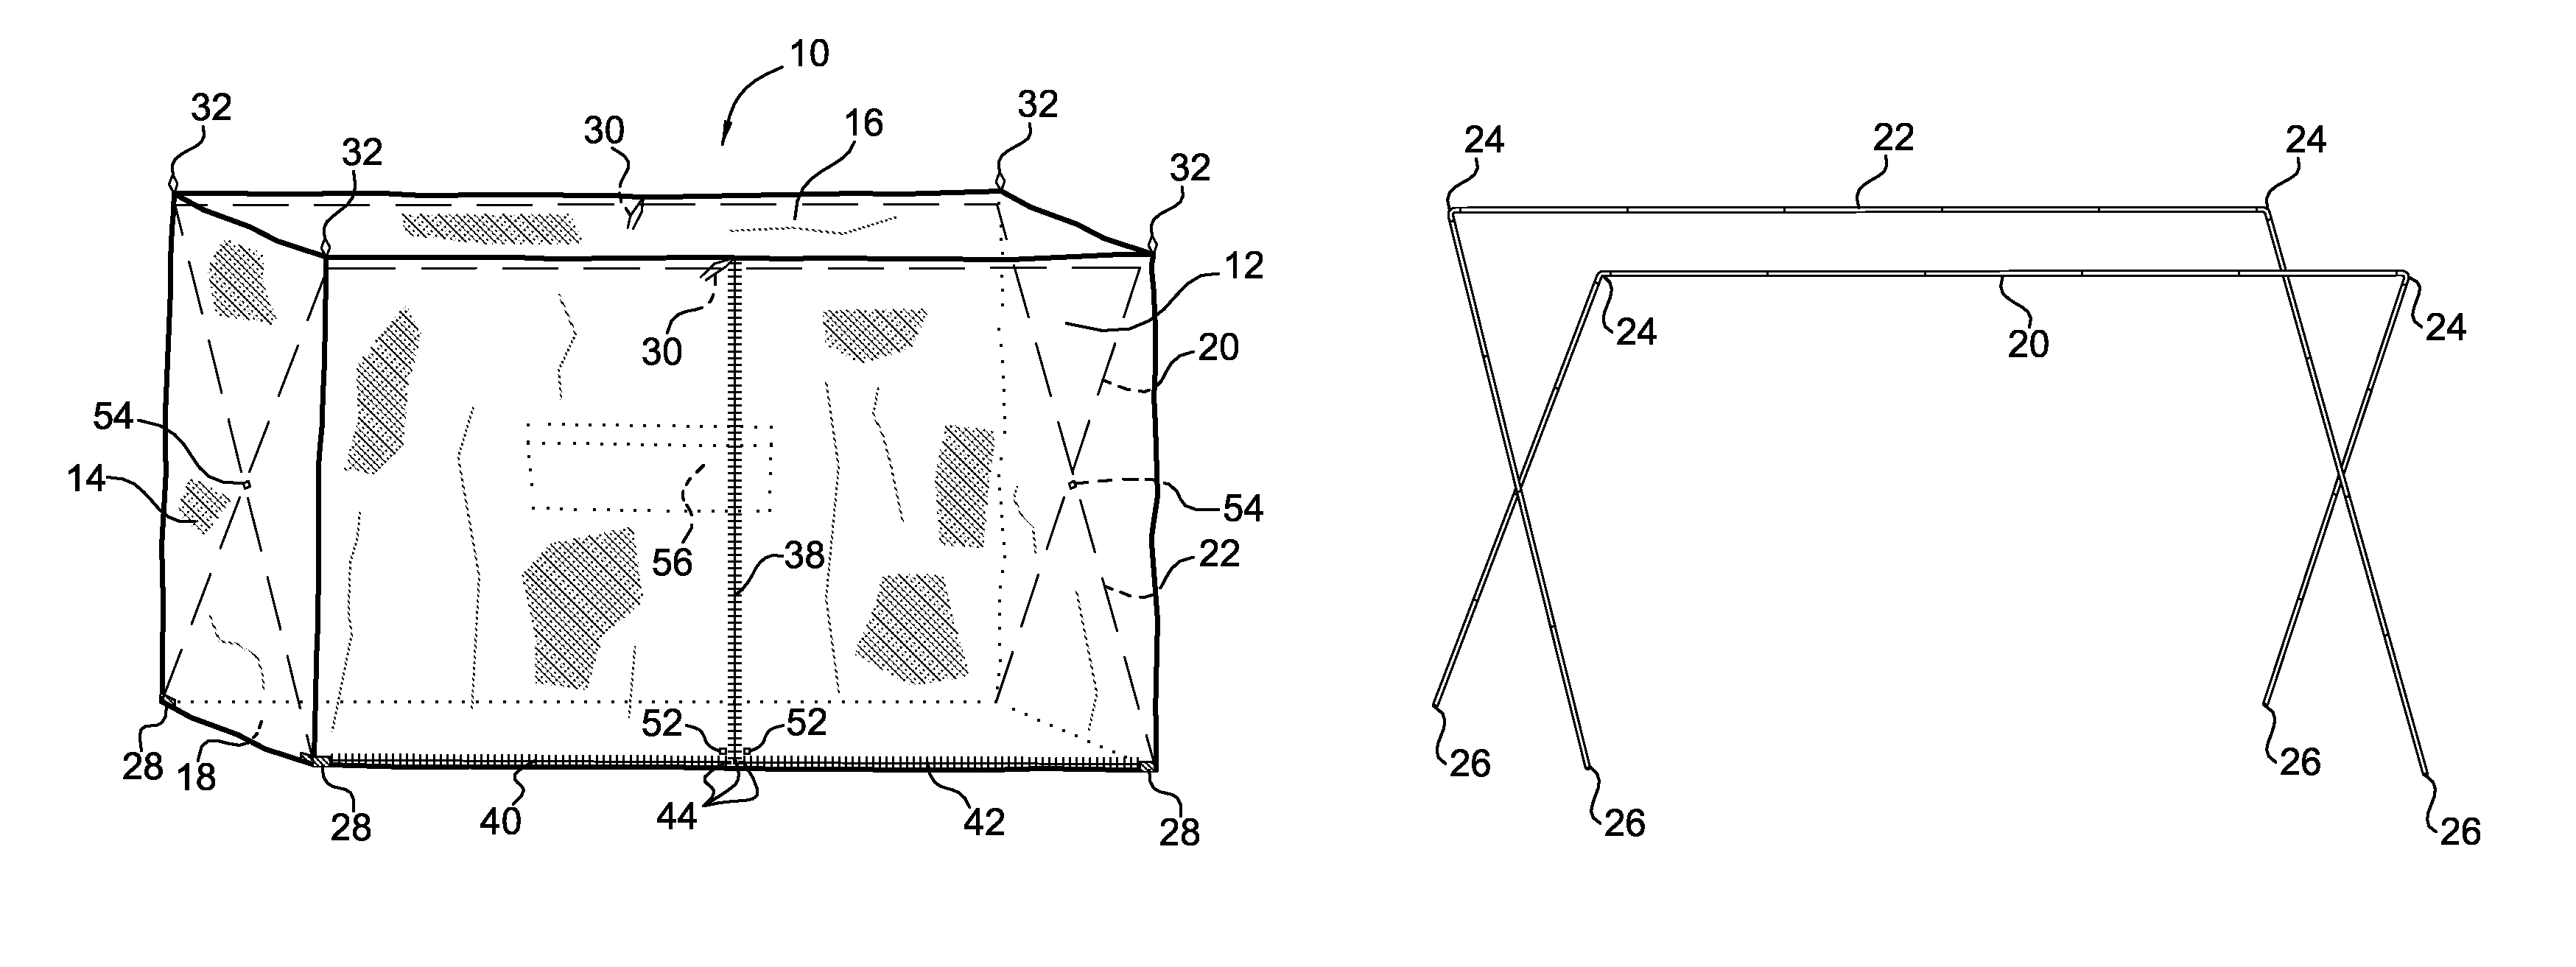 Self-supporting, high-profile, insect net enclosure